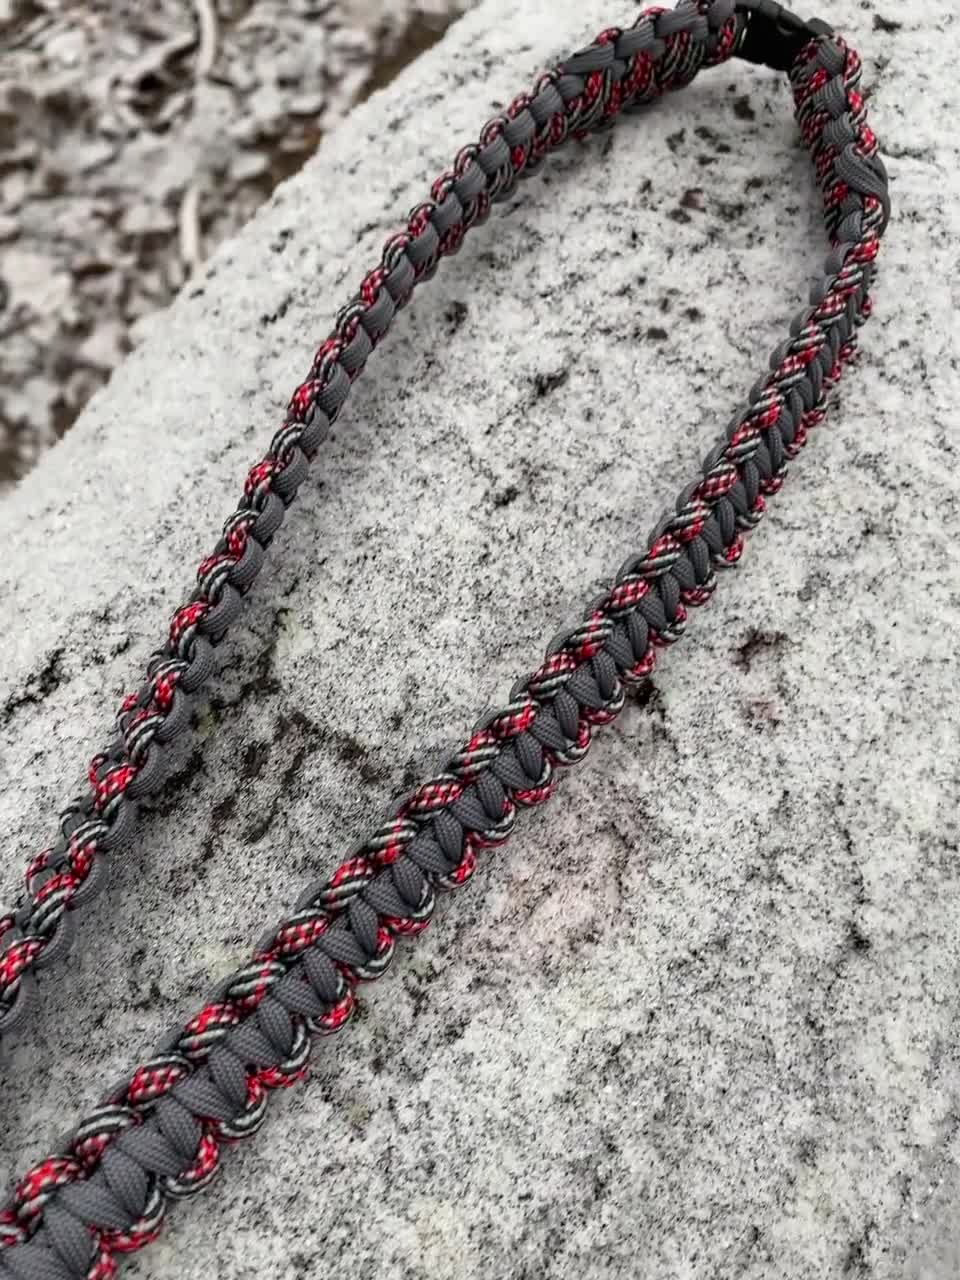 RedVex Zipper Pulls - Knife Lanyards - Equipment Lanyards - Paracord Cobra  Style - Choose Your Color & Size (Qty